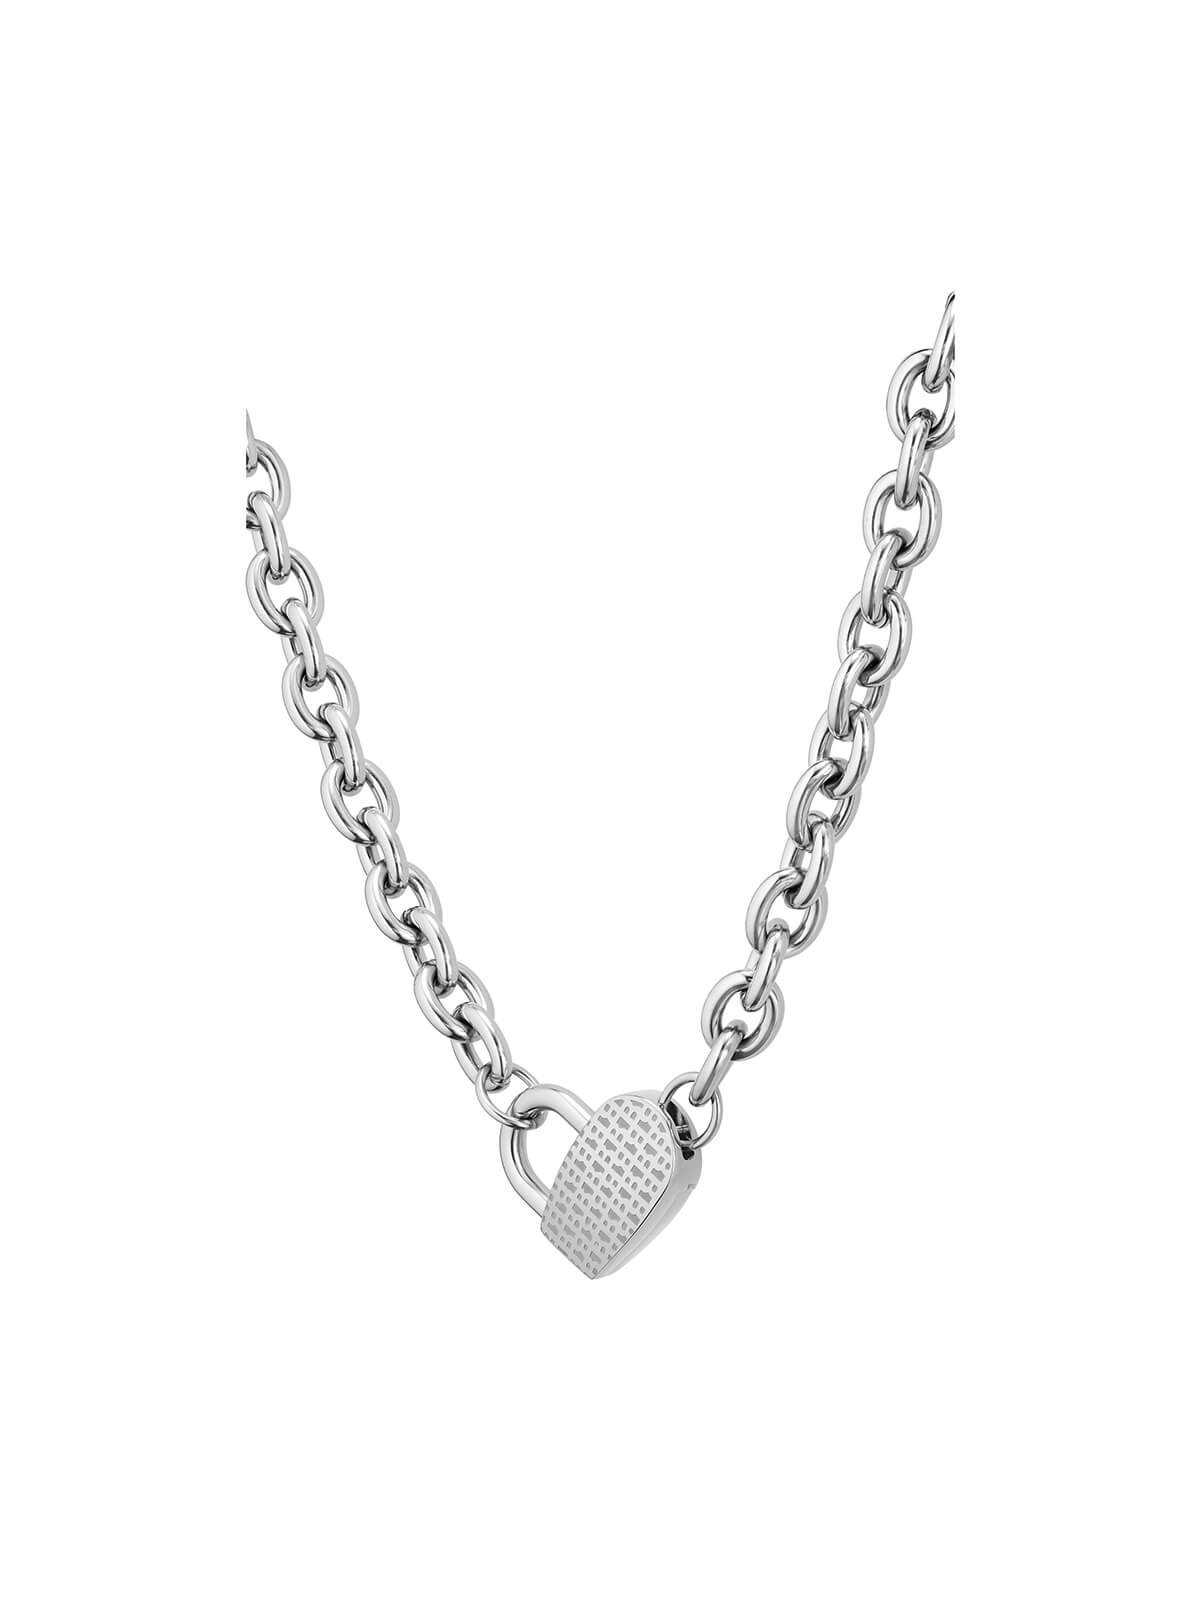 BOSS Dinya Necklace in Stainless Steel 1580416